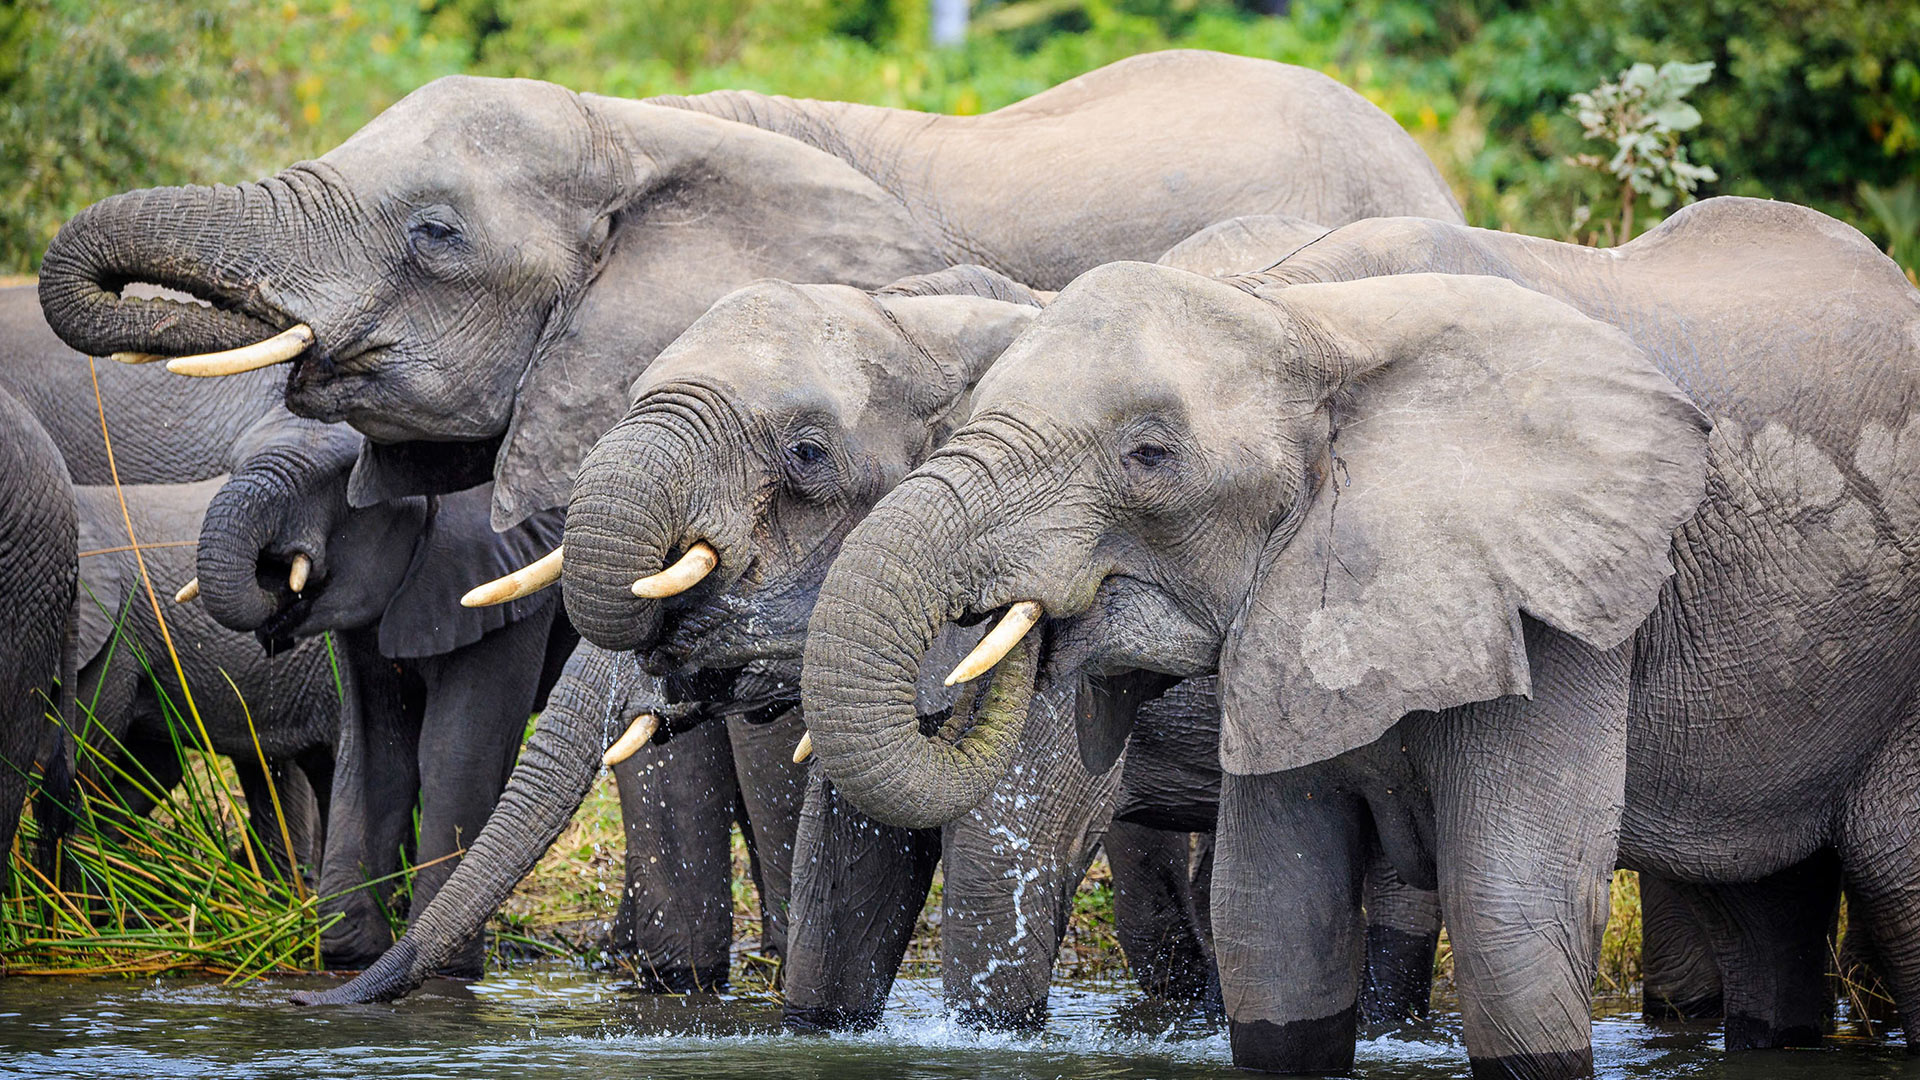 Elephants drinking from a watering hole